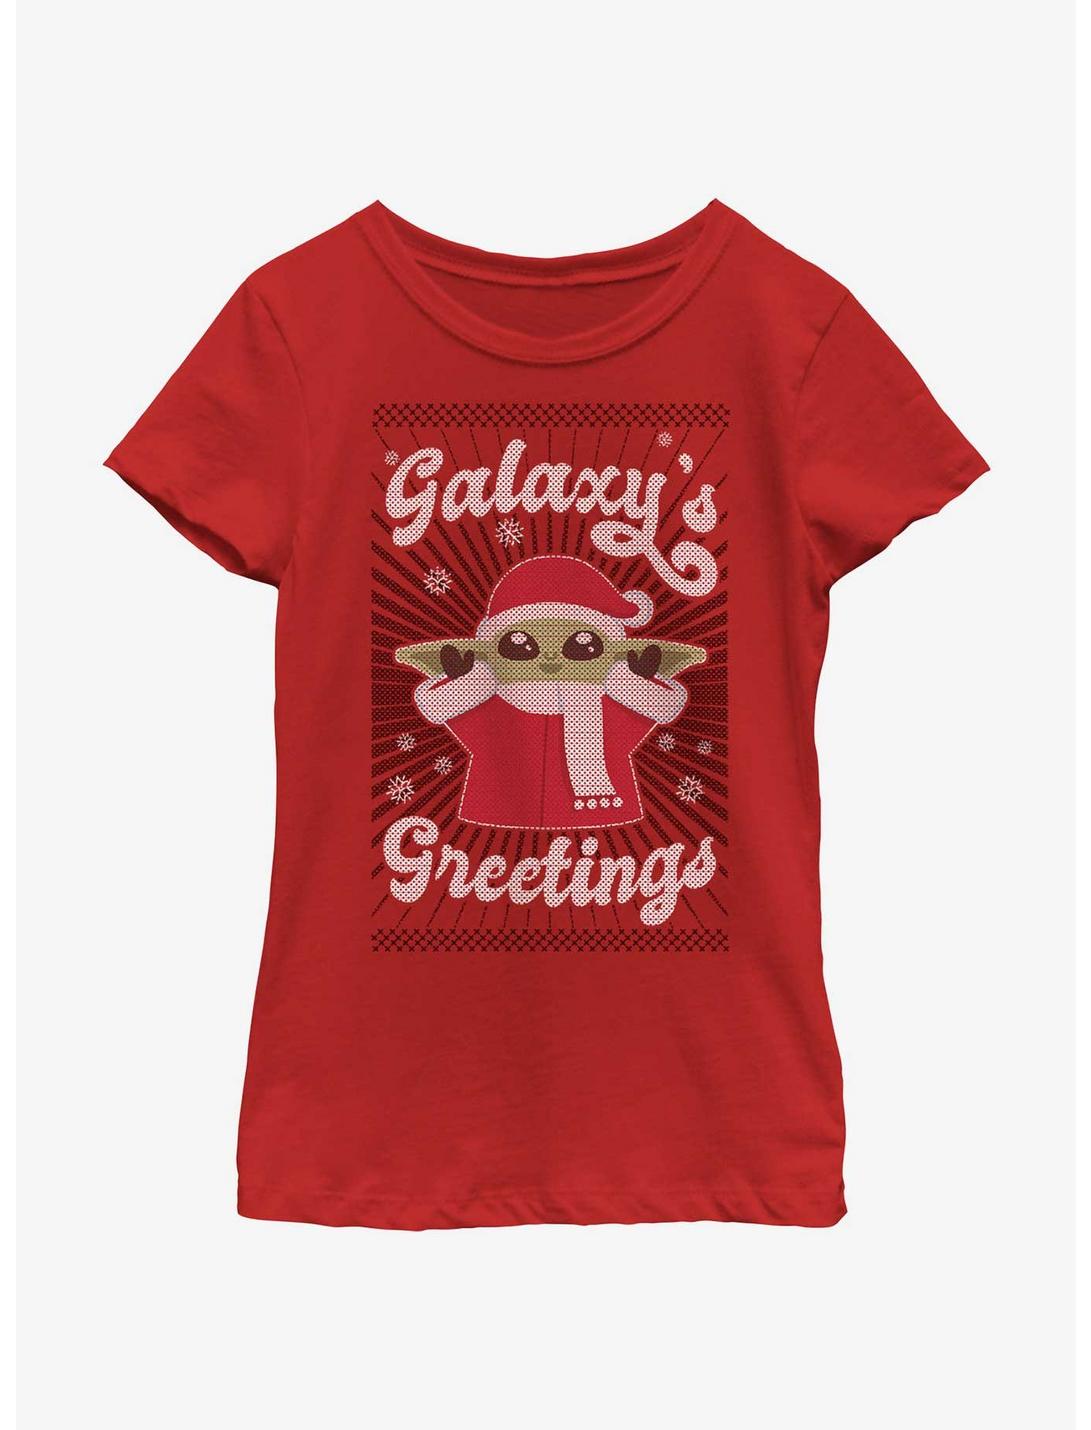 Star Wars The Mandalorian The Child Galaxy's Greetings Youth Girls T-Shirt, RED, hi-res